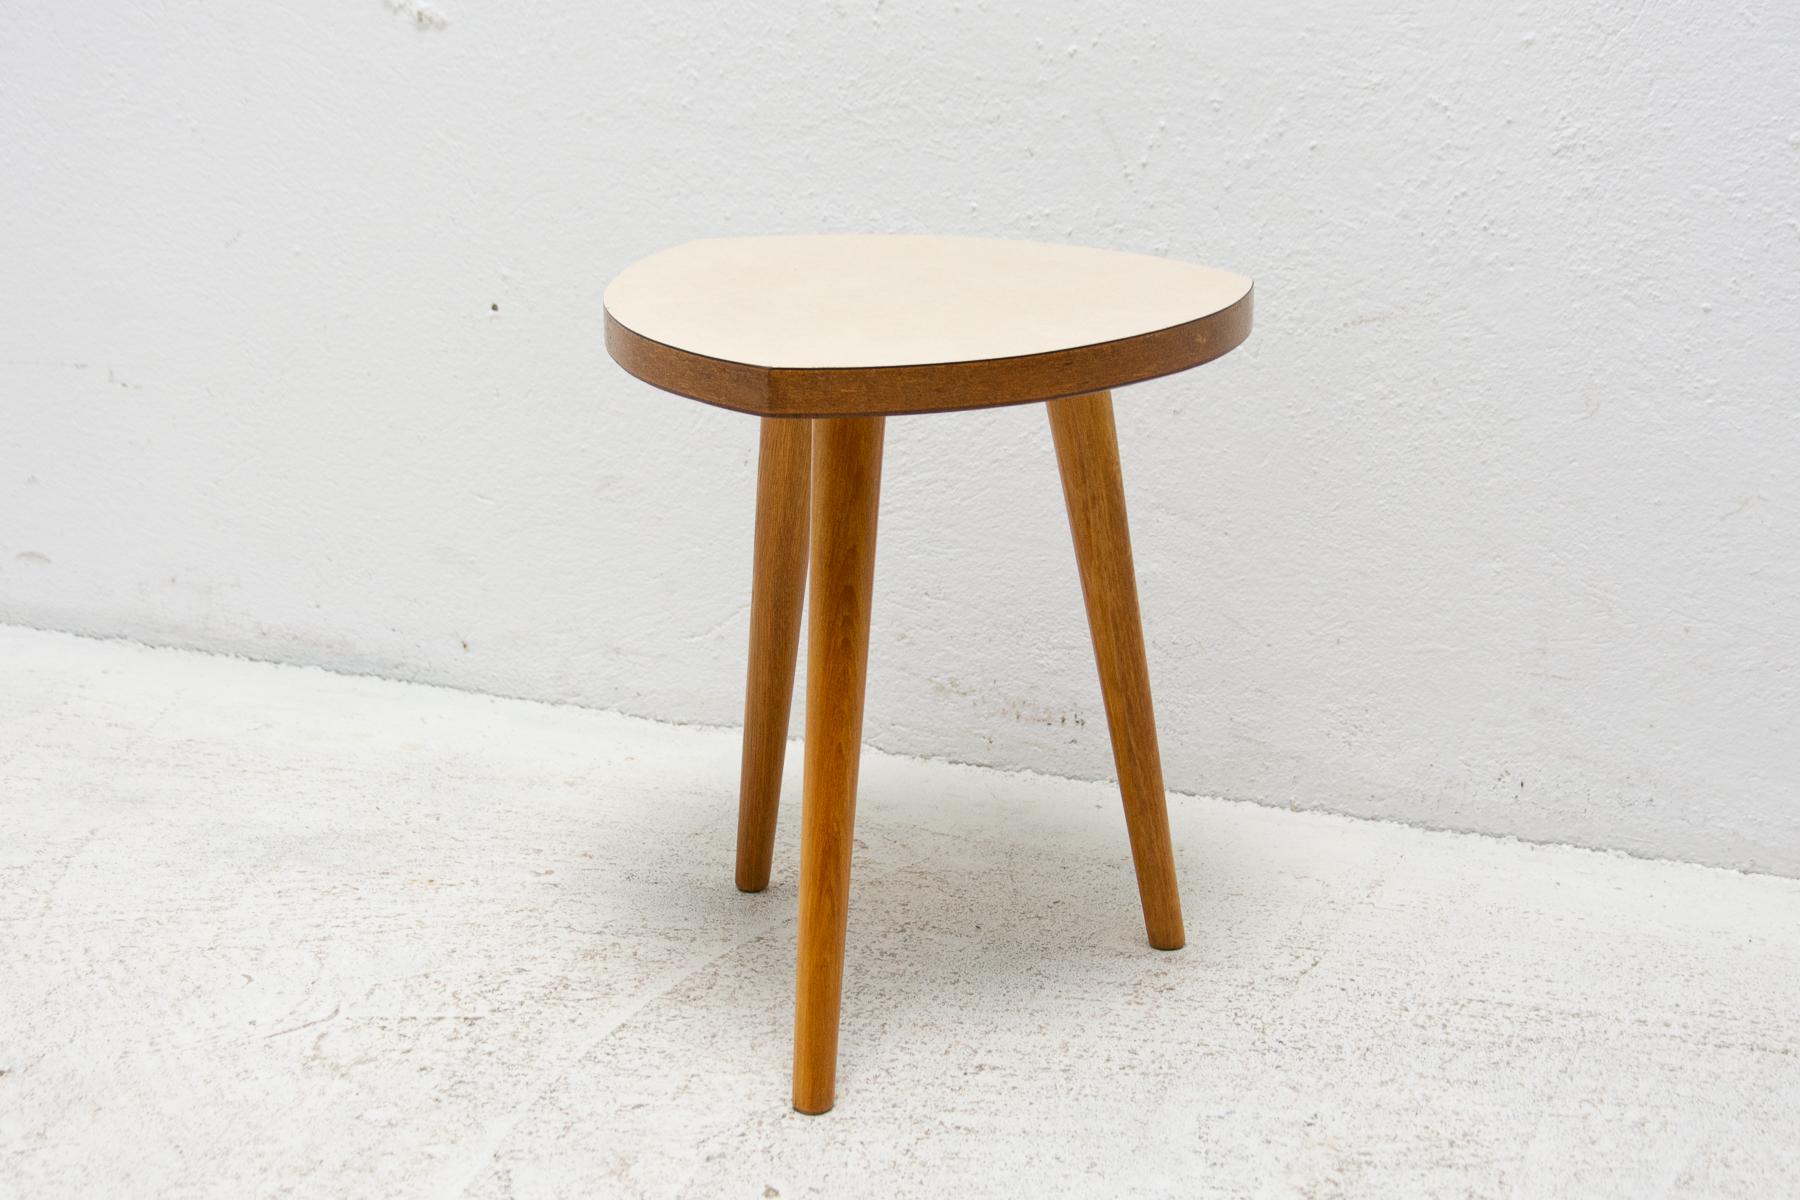 Mid century small side table. It was made in the former Czechoslovakia, in the 1960´s. Materials: formica, beechwood. Cool retro piece. In very good vintage condition.

Dimensions: 33 x 37 x 33 cm (W x H x D)

Seat height : 33 cm.
   